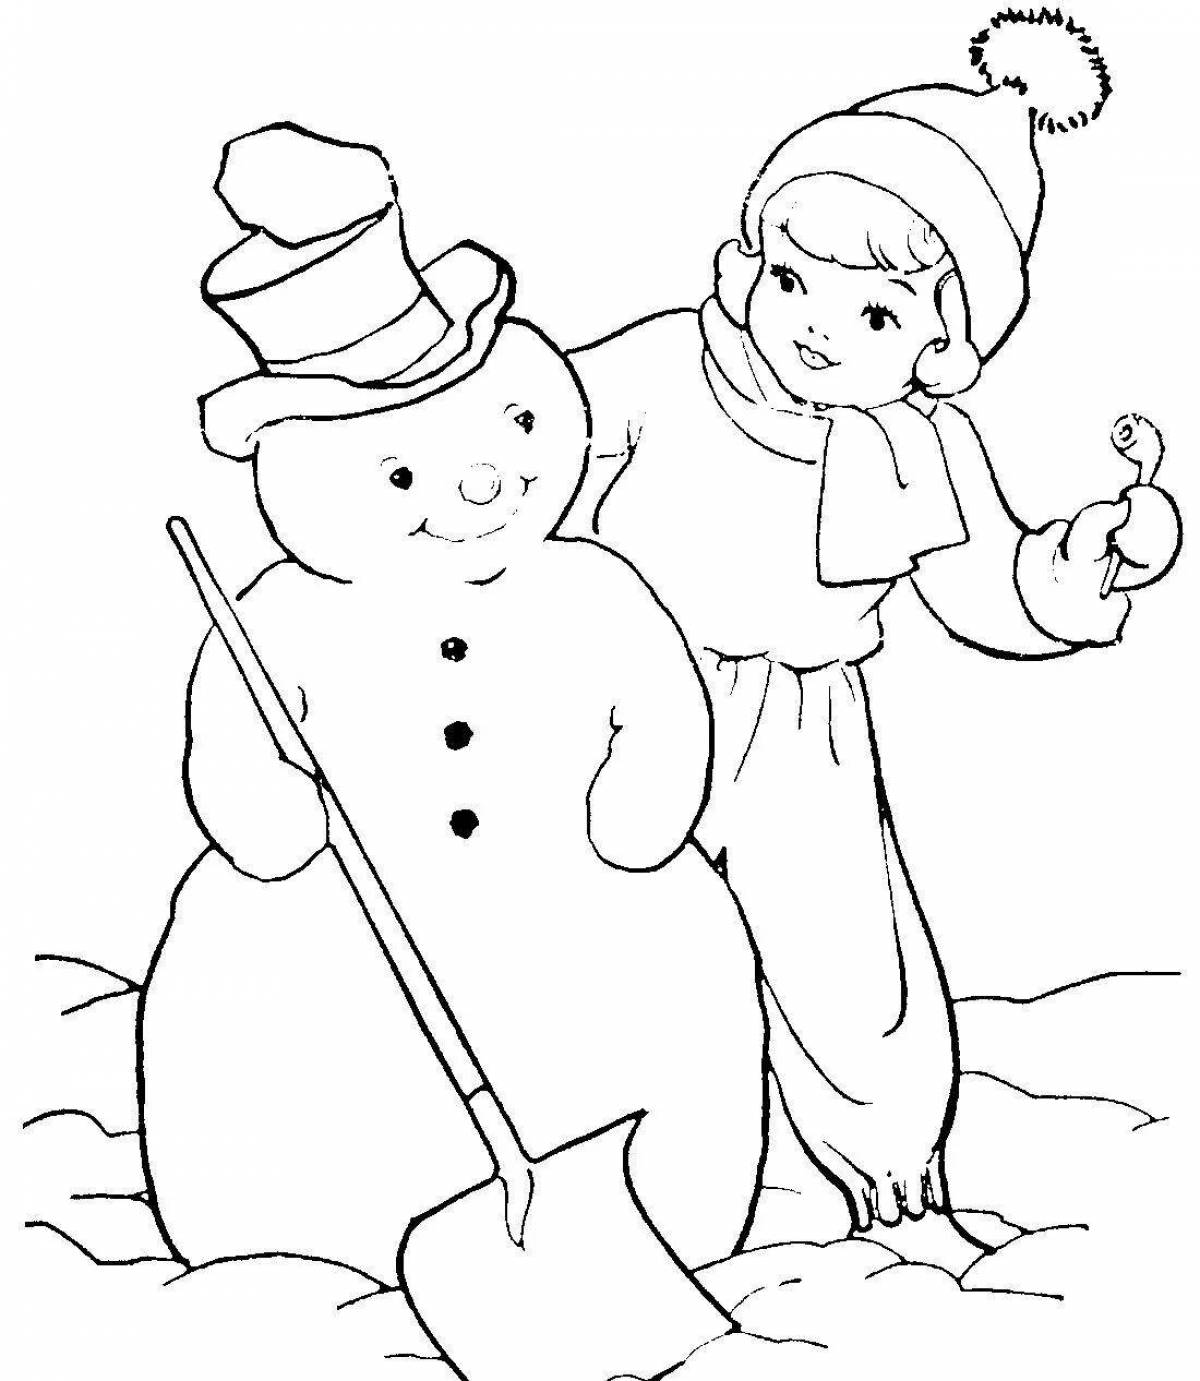 Crazy snowman coloring book for kids